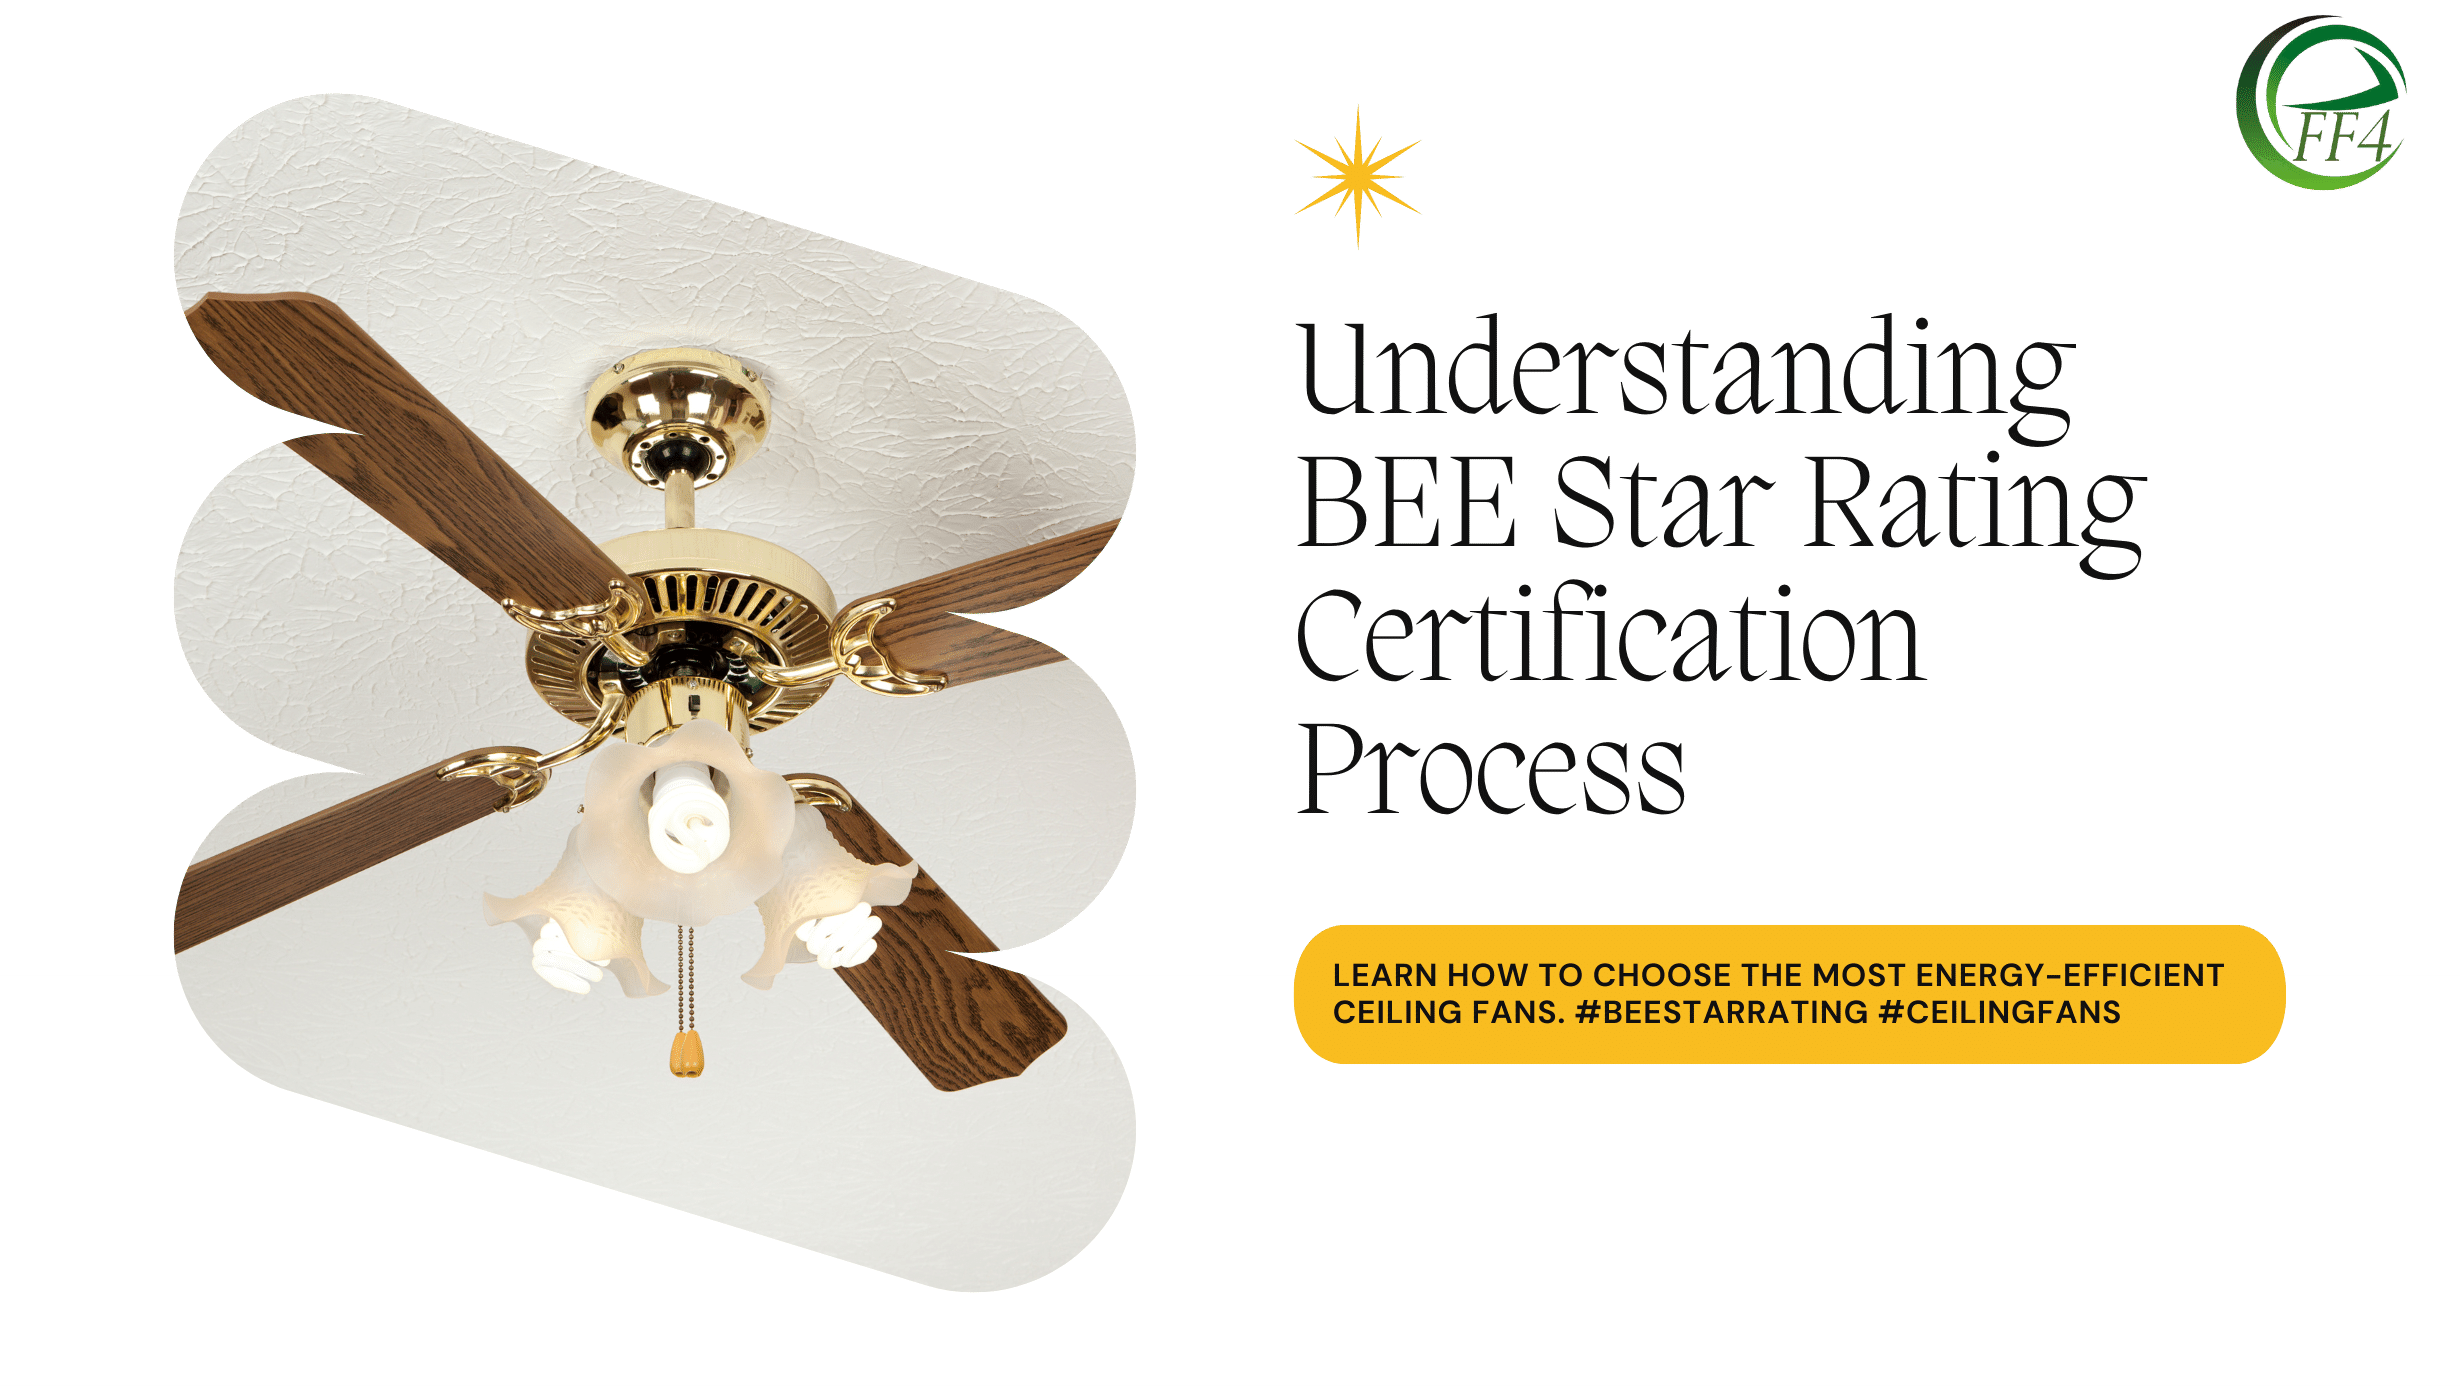 Understanding the 5-Star Rating System for Ceiling Fans and Energy Efficiency Certification Process